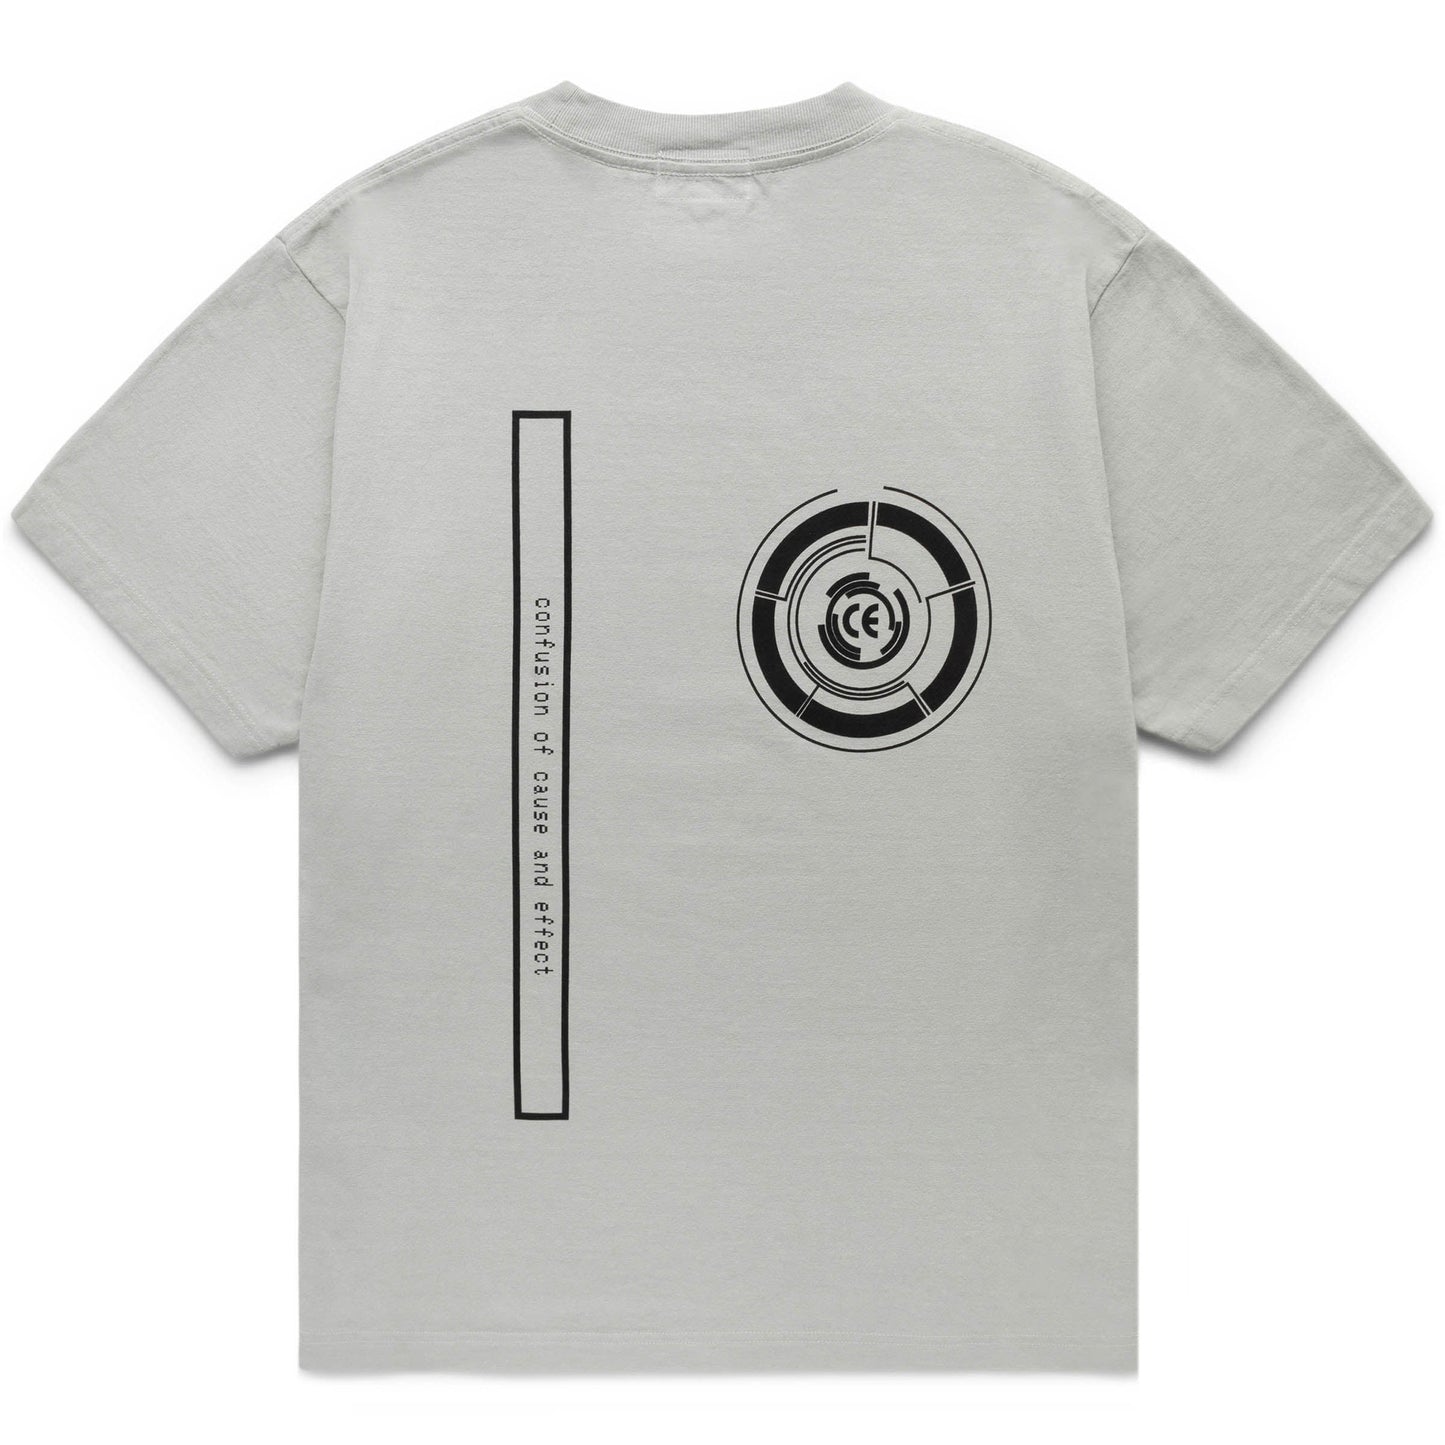 Cav Empt OVERDYE CAUSE AND EFFECT T-SHIRT